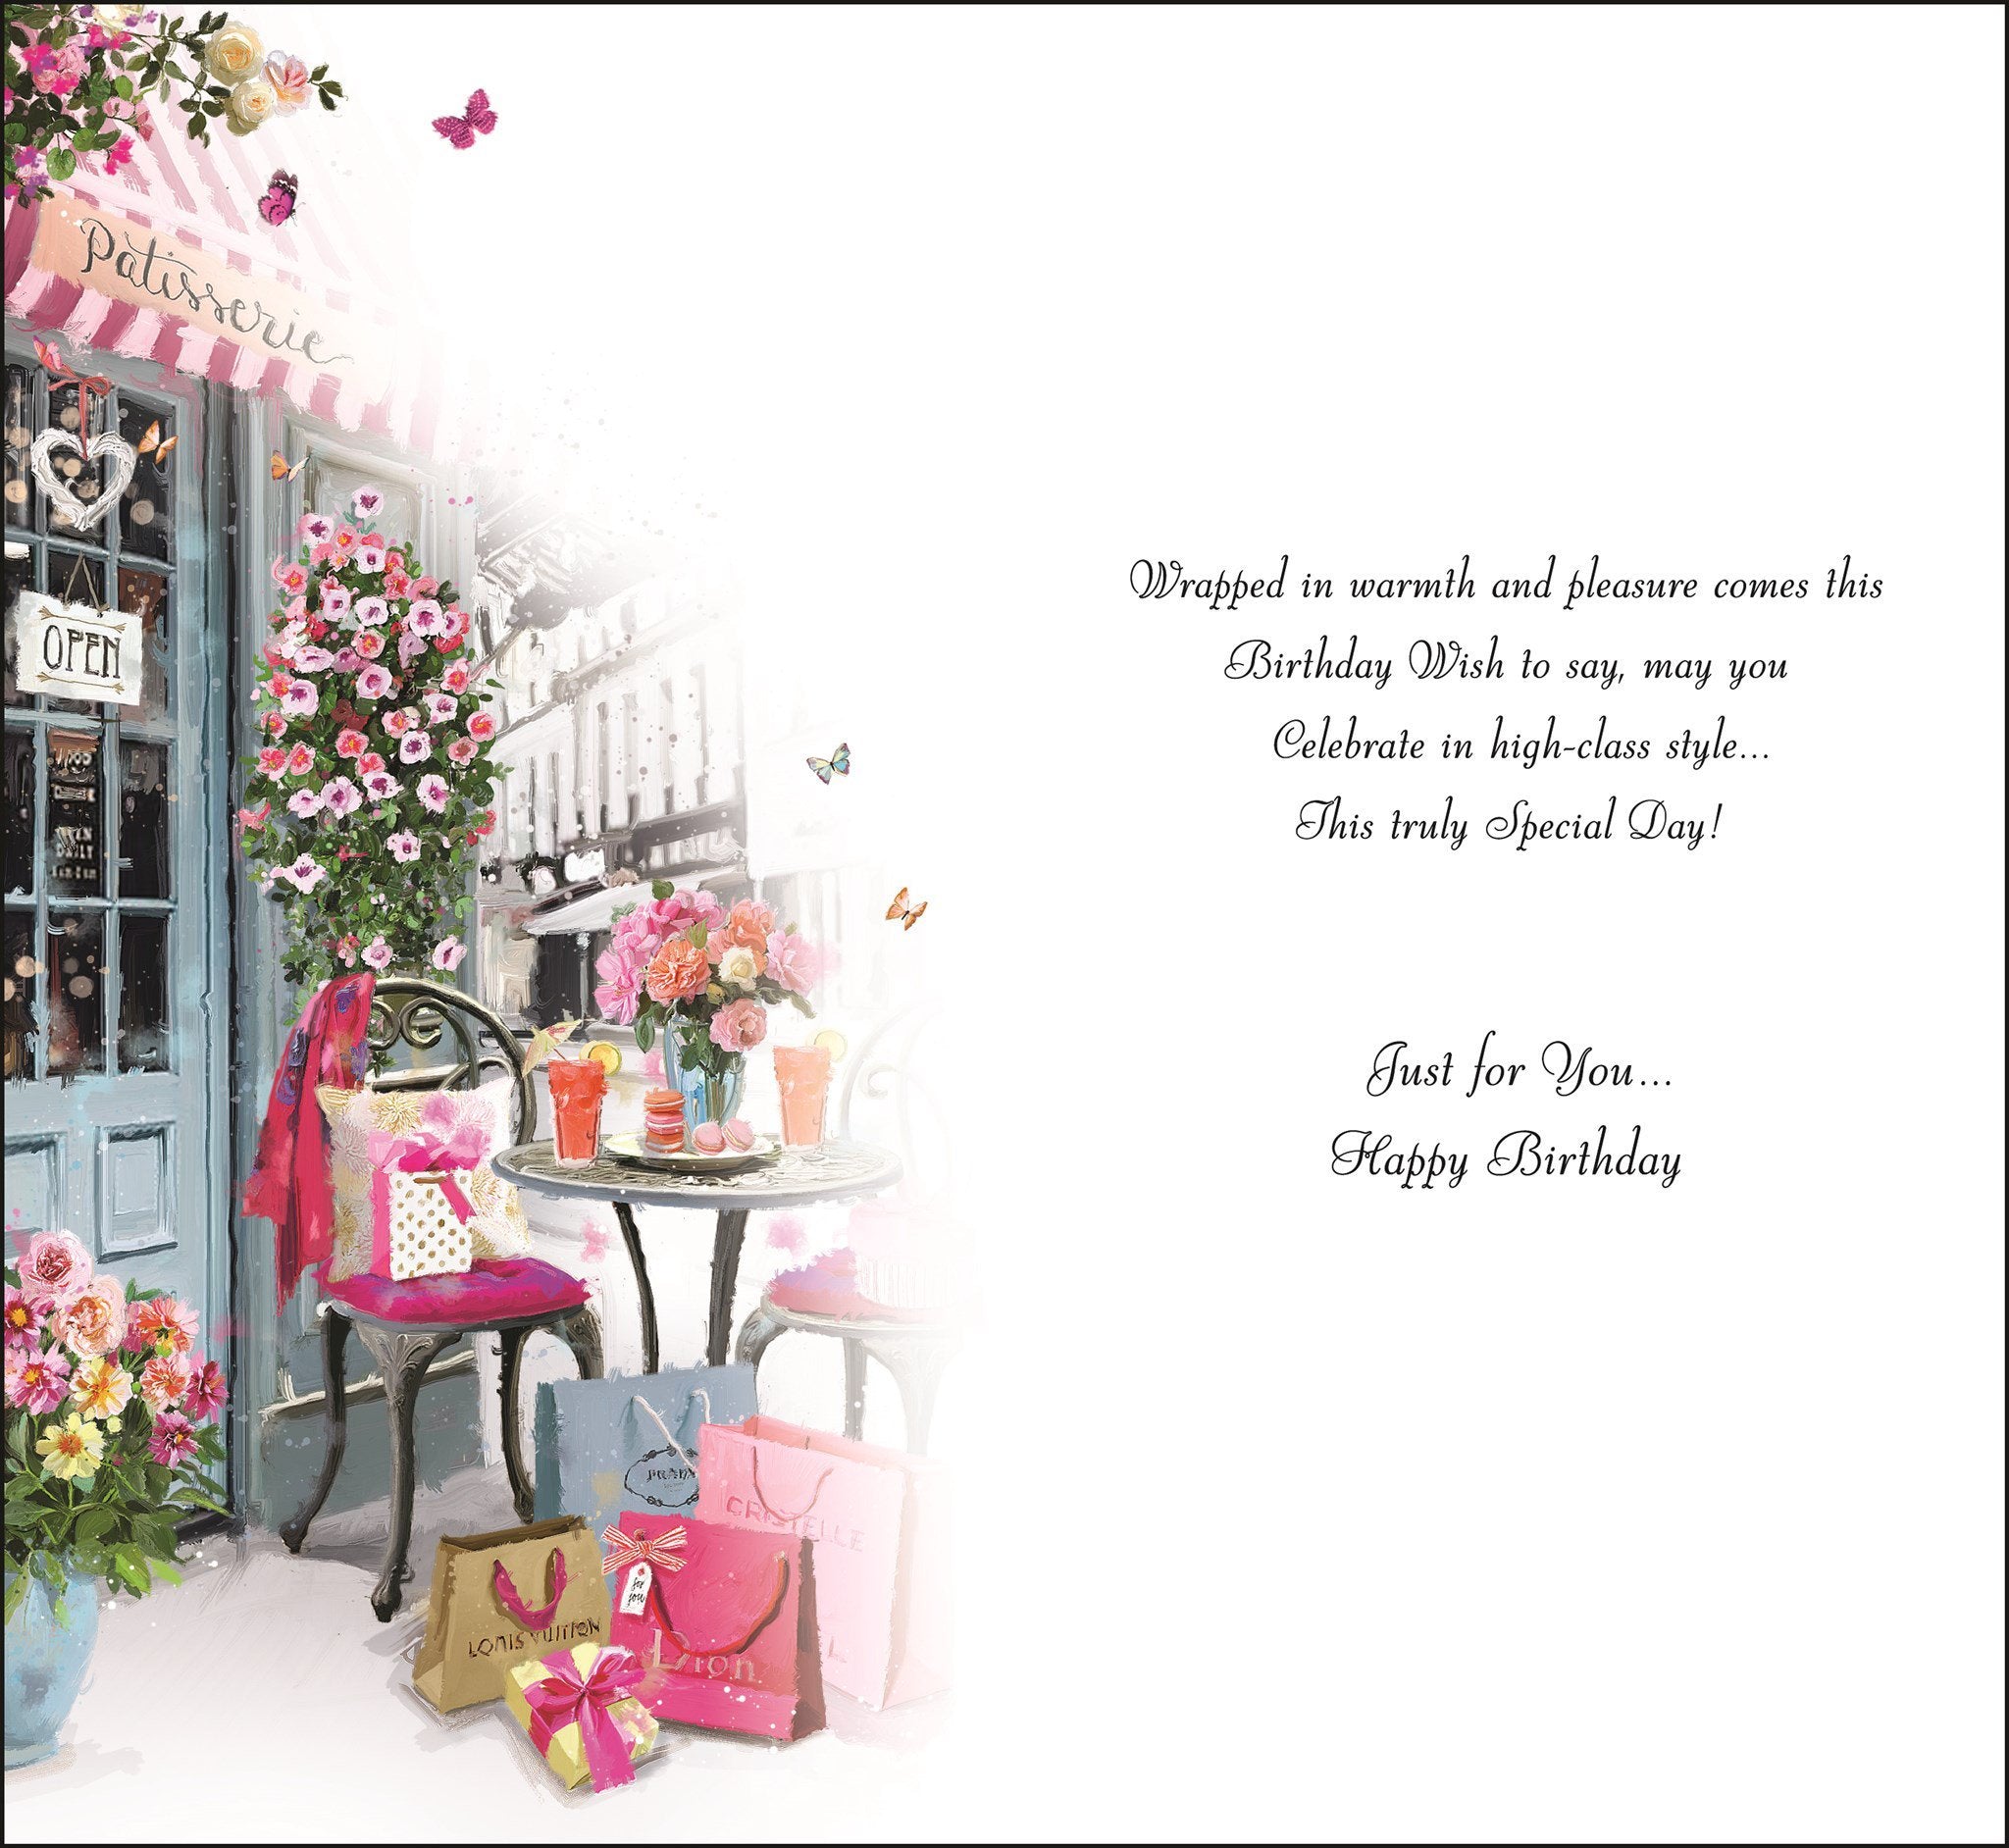 Inside of Birthday Wishes Patisserie Greetings Card